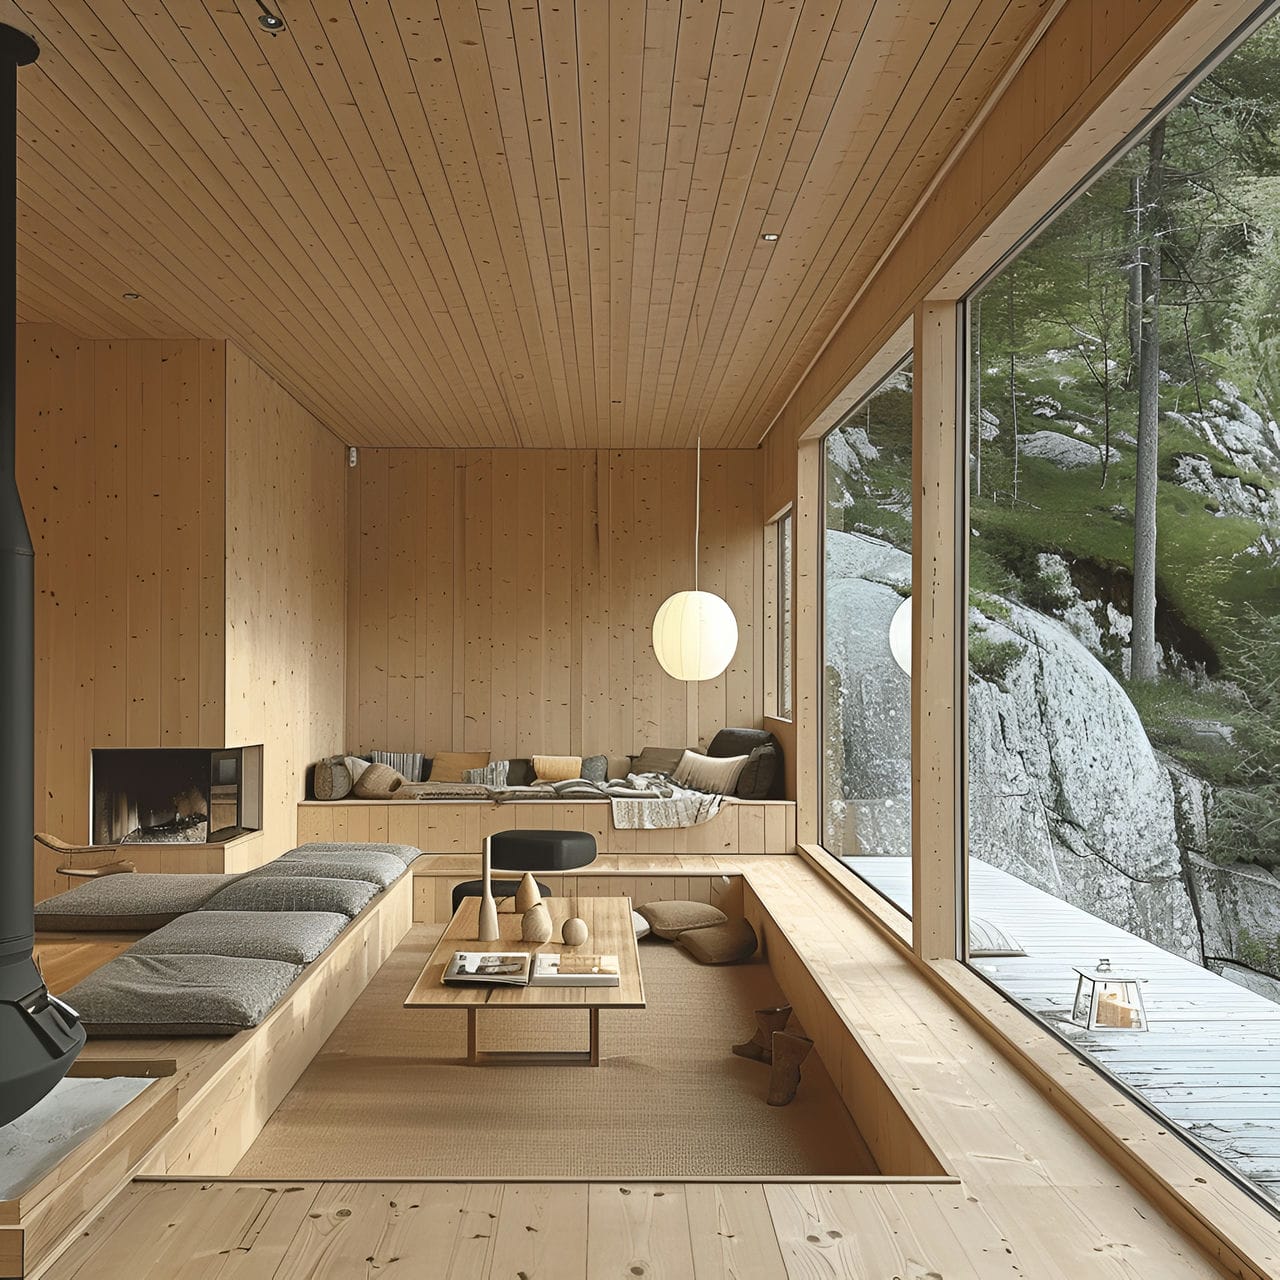 Guest house: size, functionality, uses, furniture and renovation